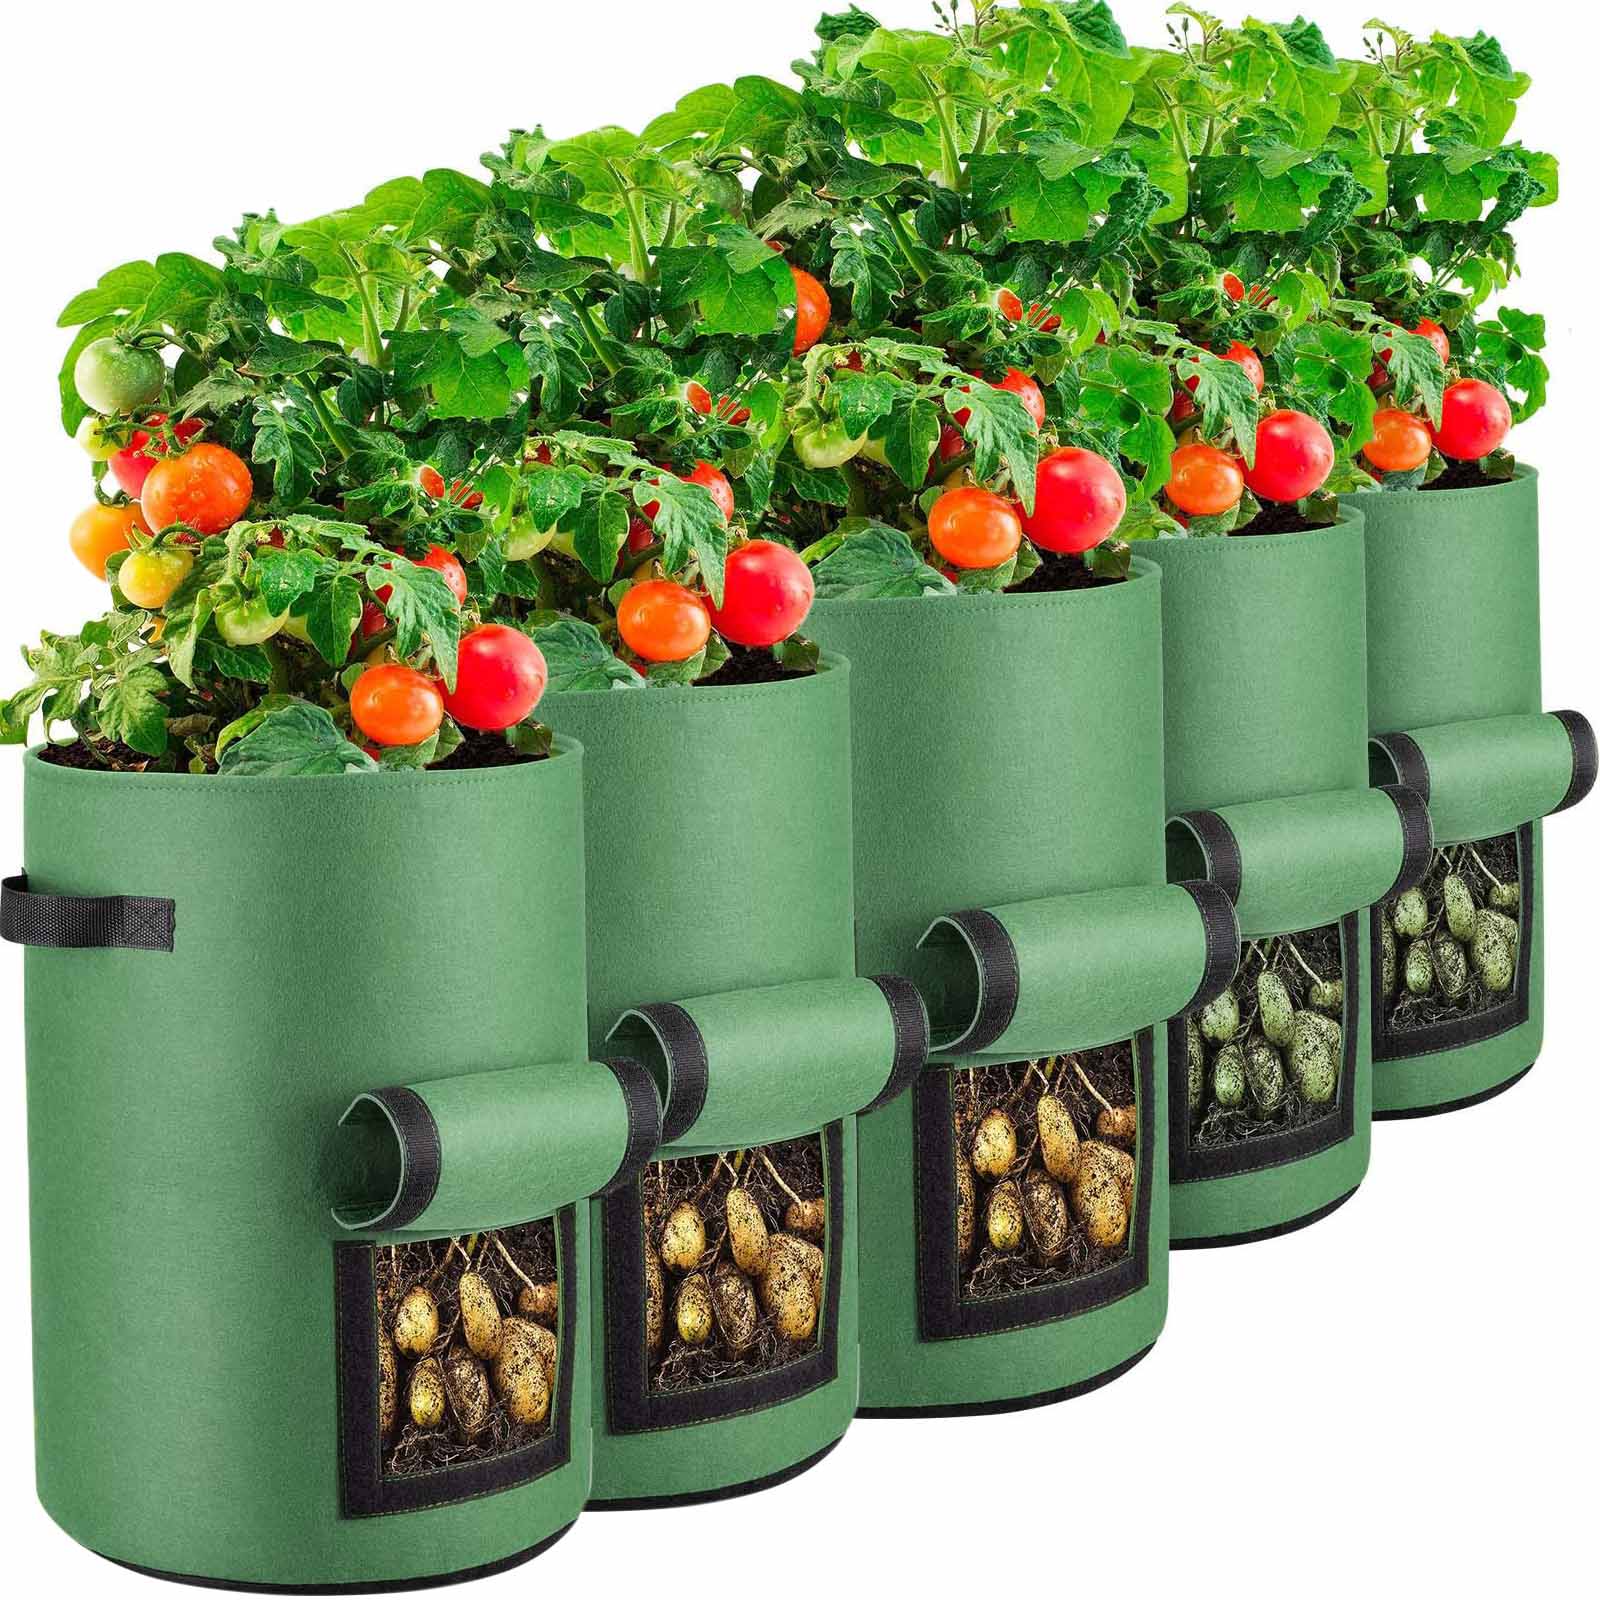 5-Pack 5 Gallons Plant Grow Bag | Potato Container Pots with Handles | Garden Planter